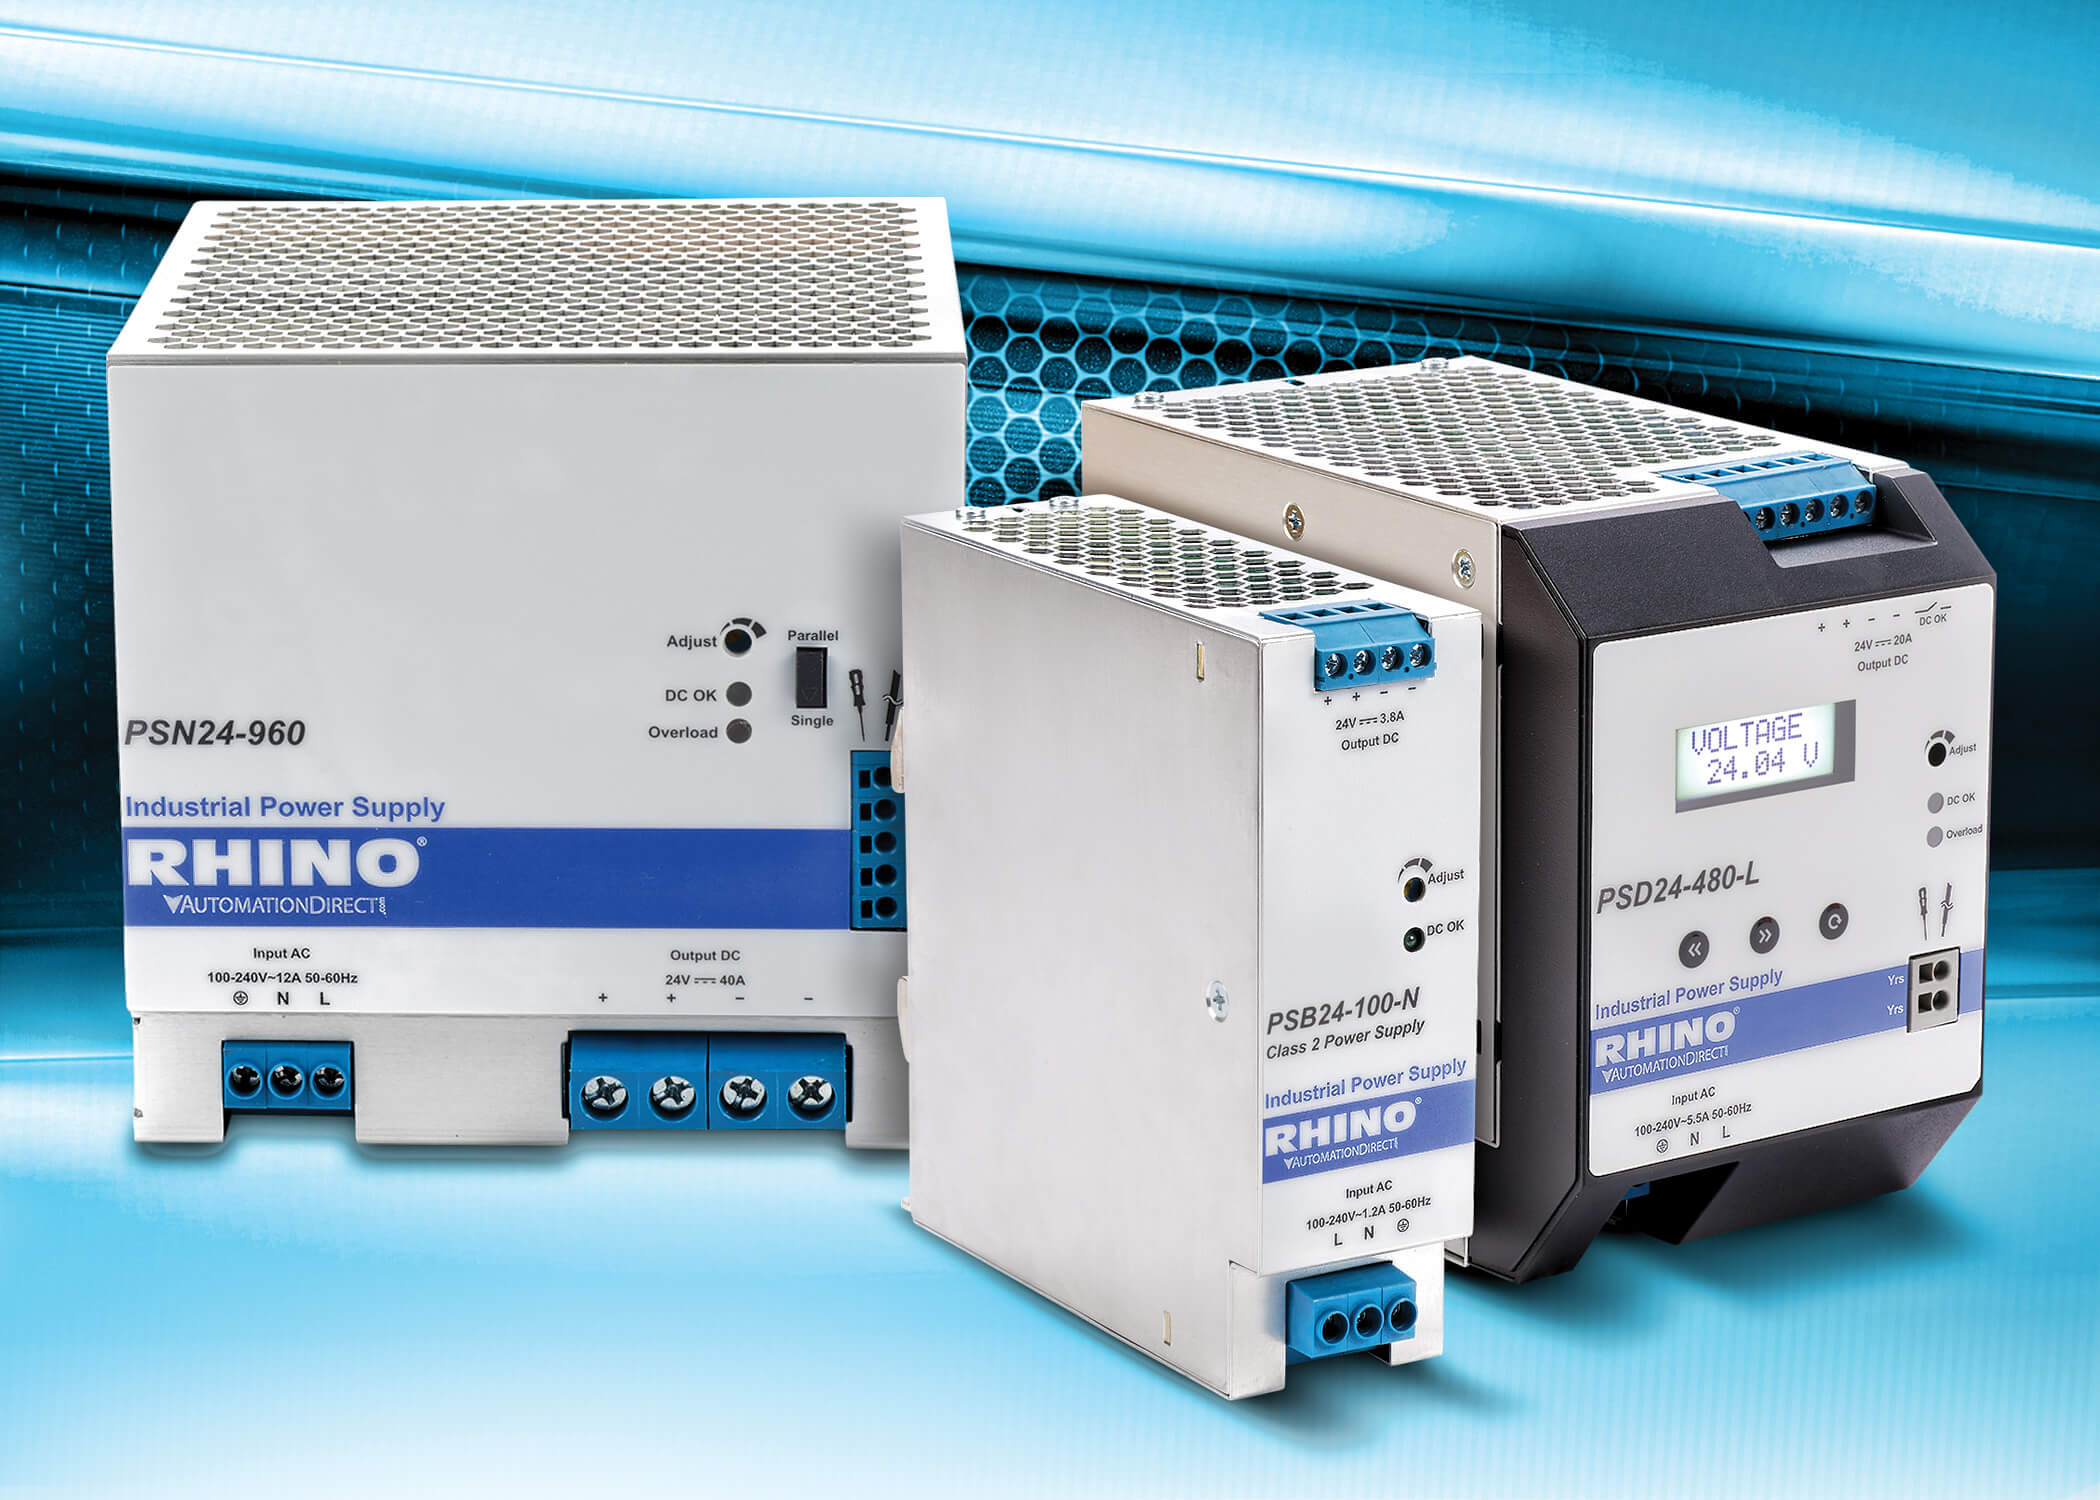 AutomationDirect RHINO Switching Power Supplies with Advanced Power Boost